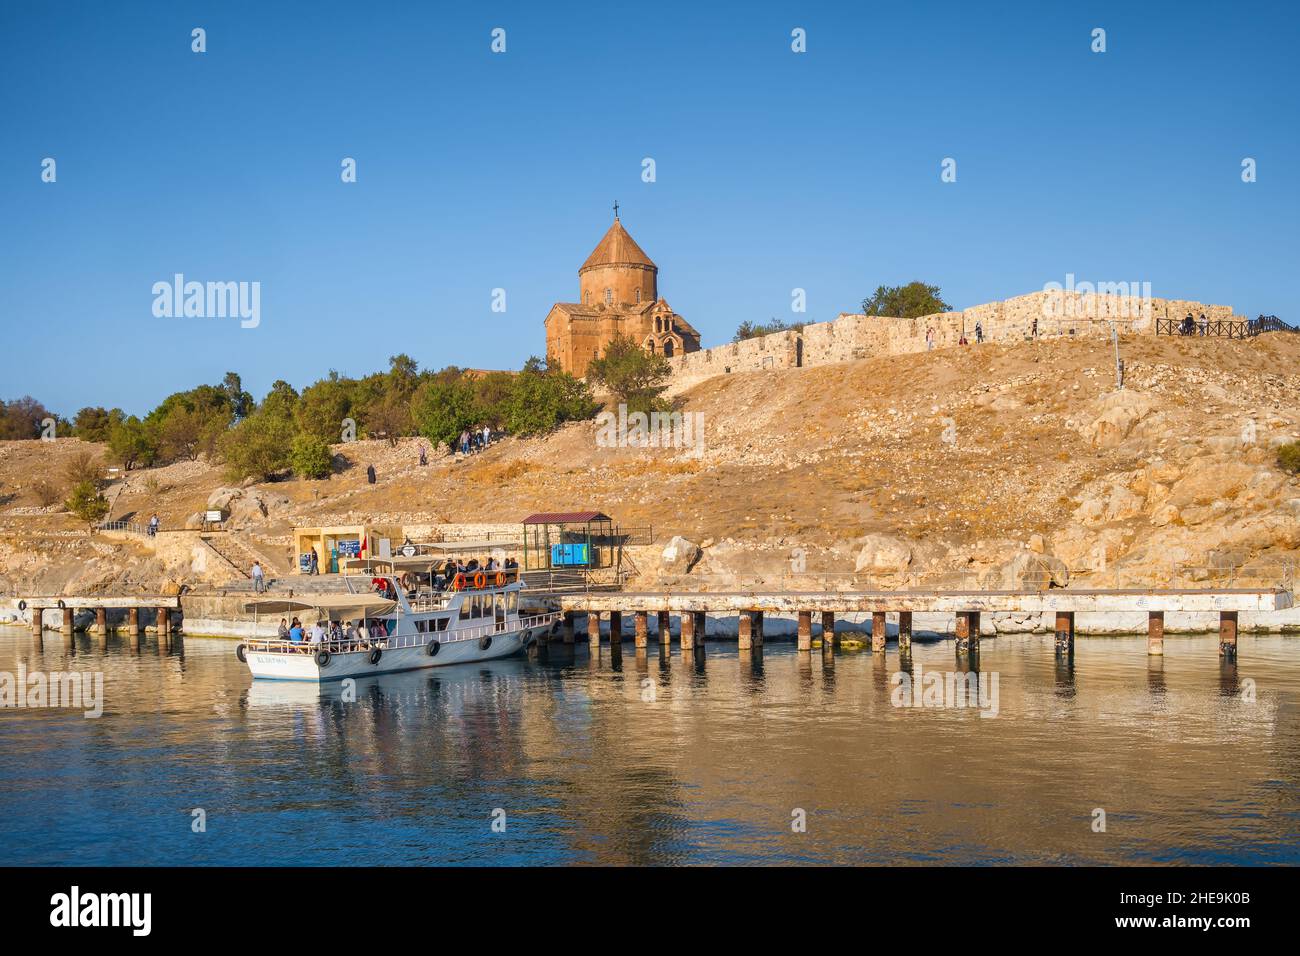 The Cathedral of the Holy Cross on Akdamar Island at Van lake in Turkey Stock Photo